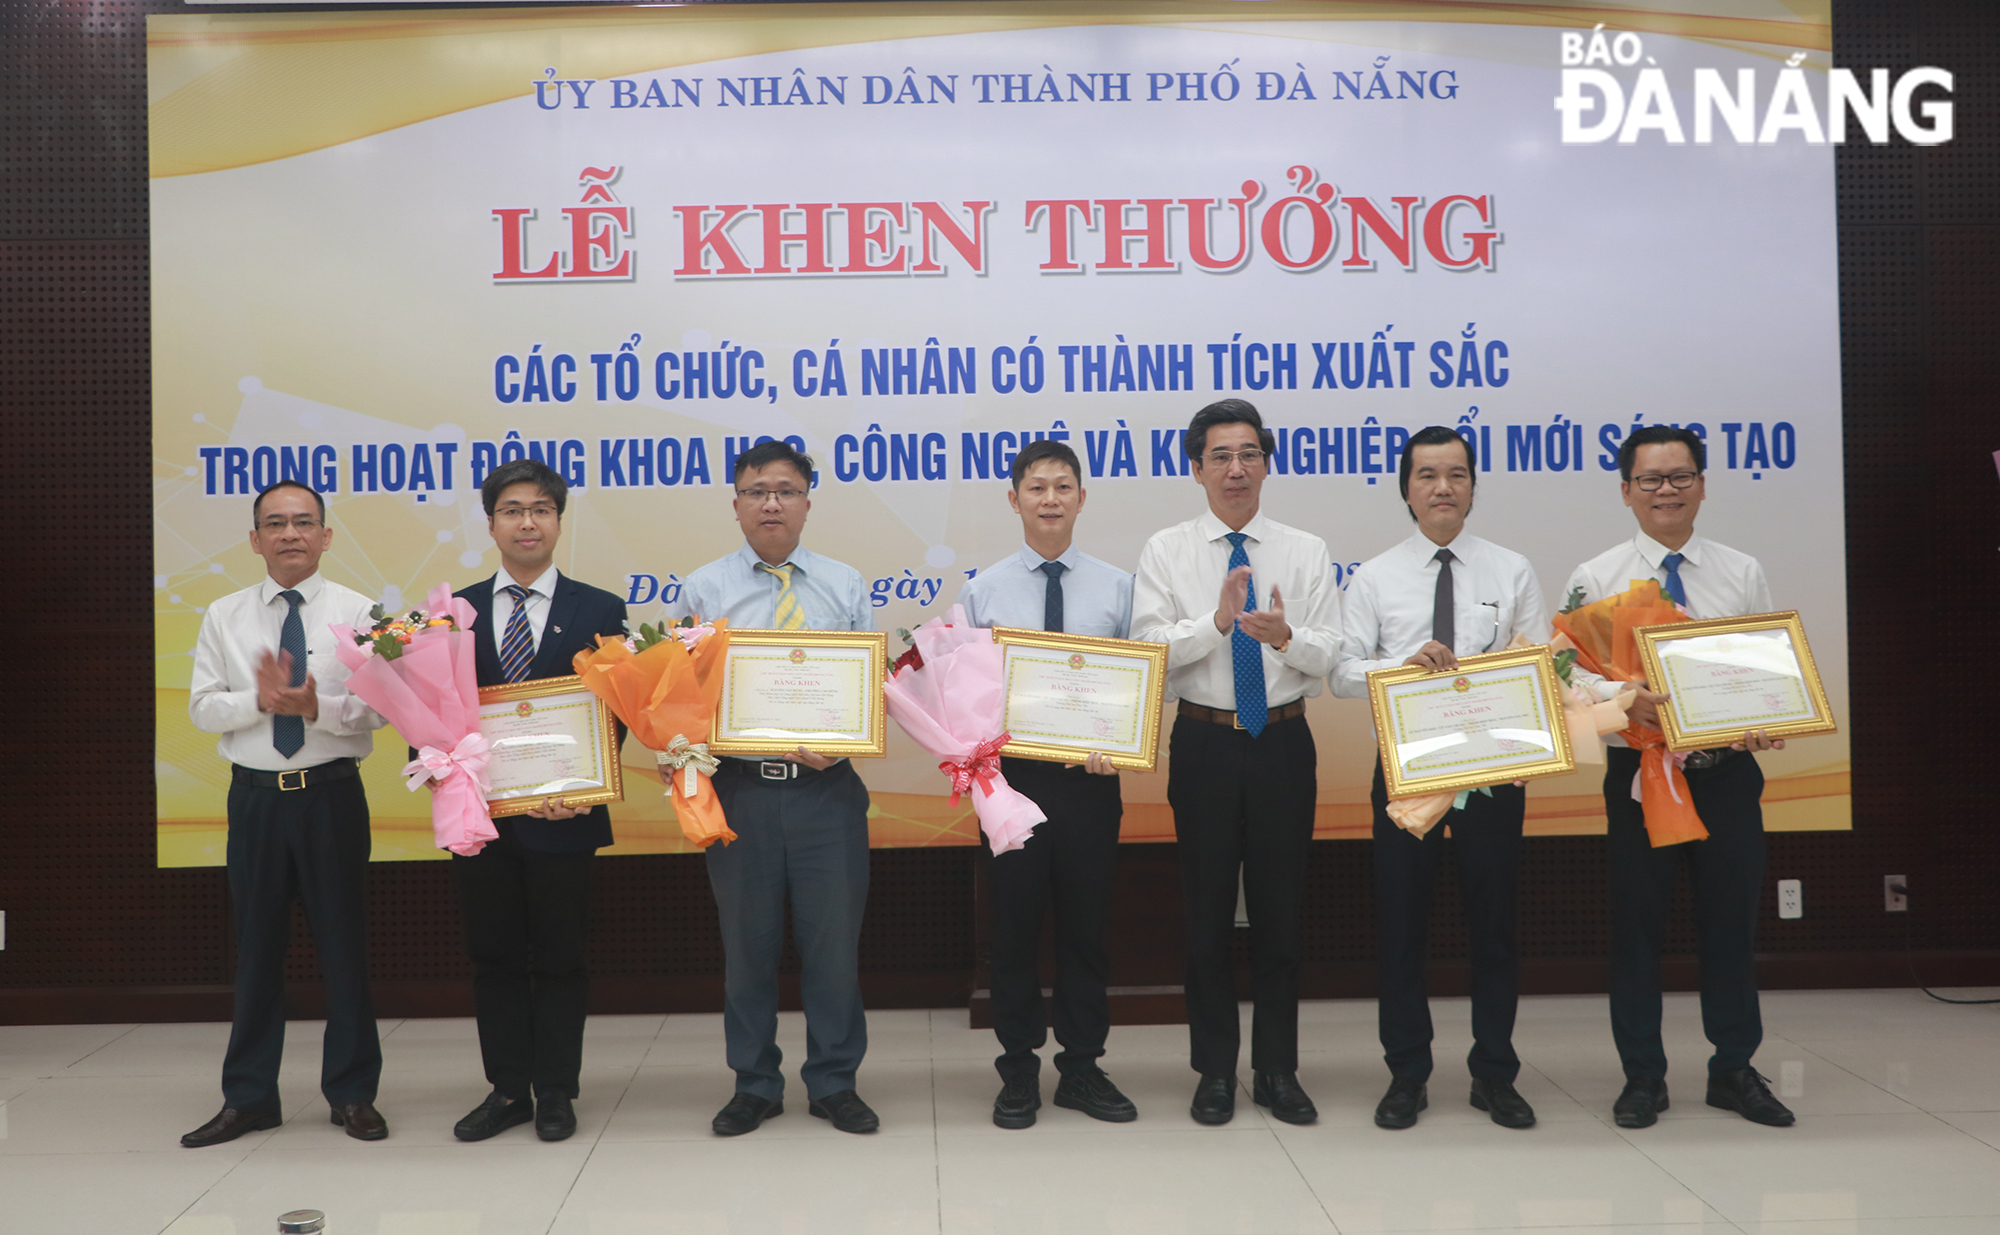 Vice Chairman of the Da Nang People's Committee Tran Chi Cuong (3rd, right) agiving Certificates of Merit to authors and groups of authors of inventions and useful solutions. Photo: VAN HOANG